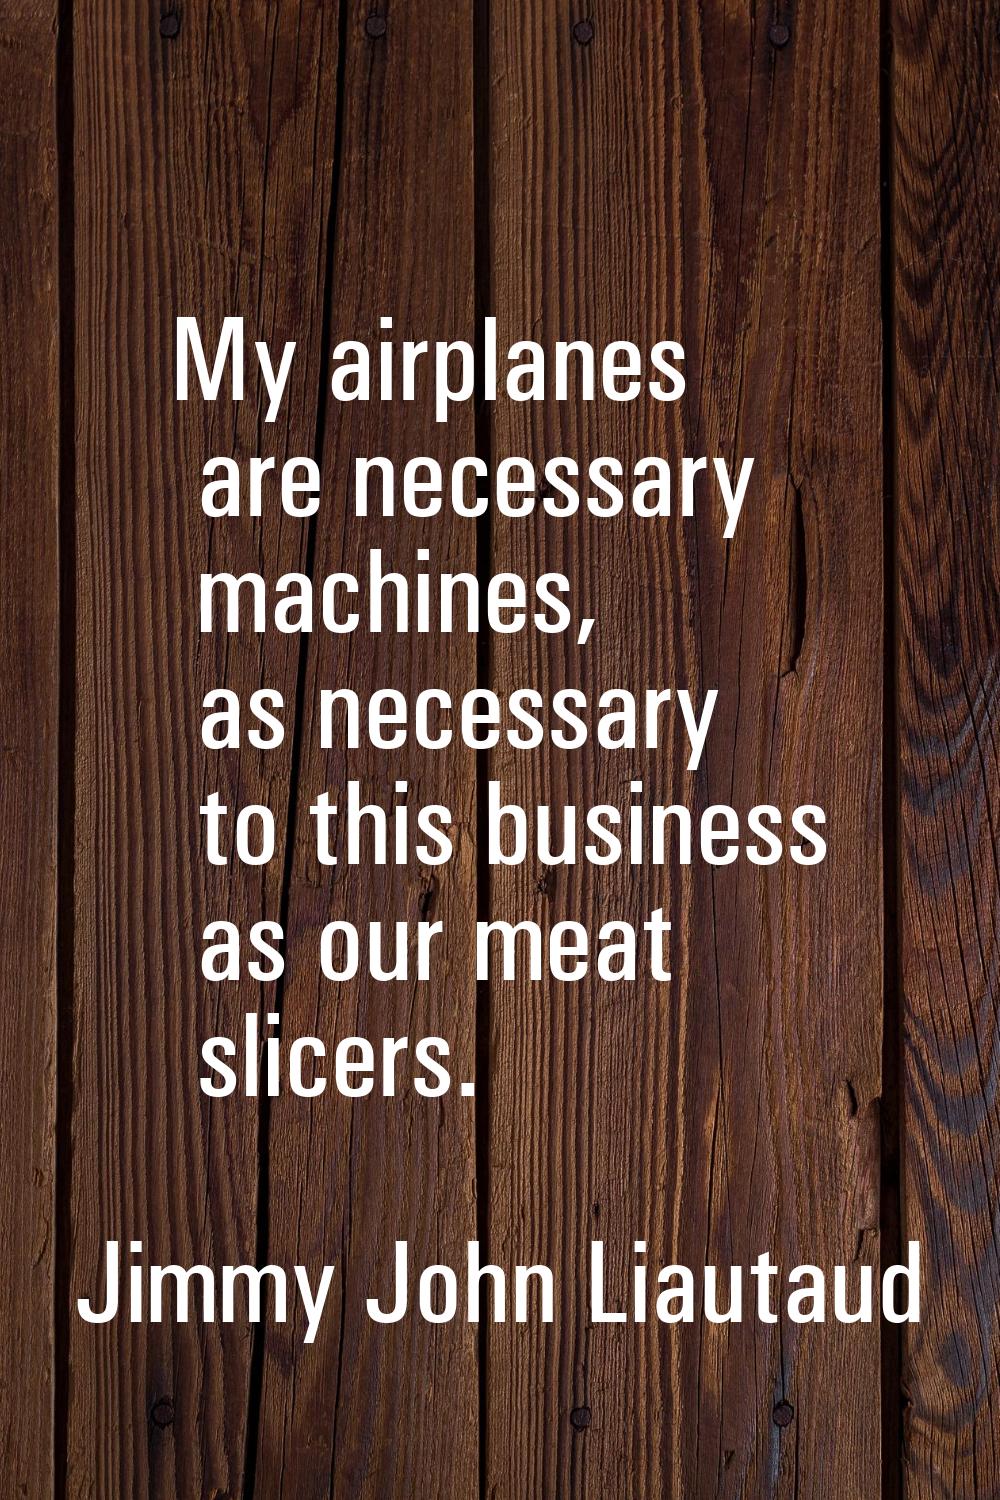 My airplanes are necessary machines, as necessary to this business as our meat slicers.